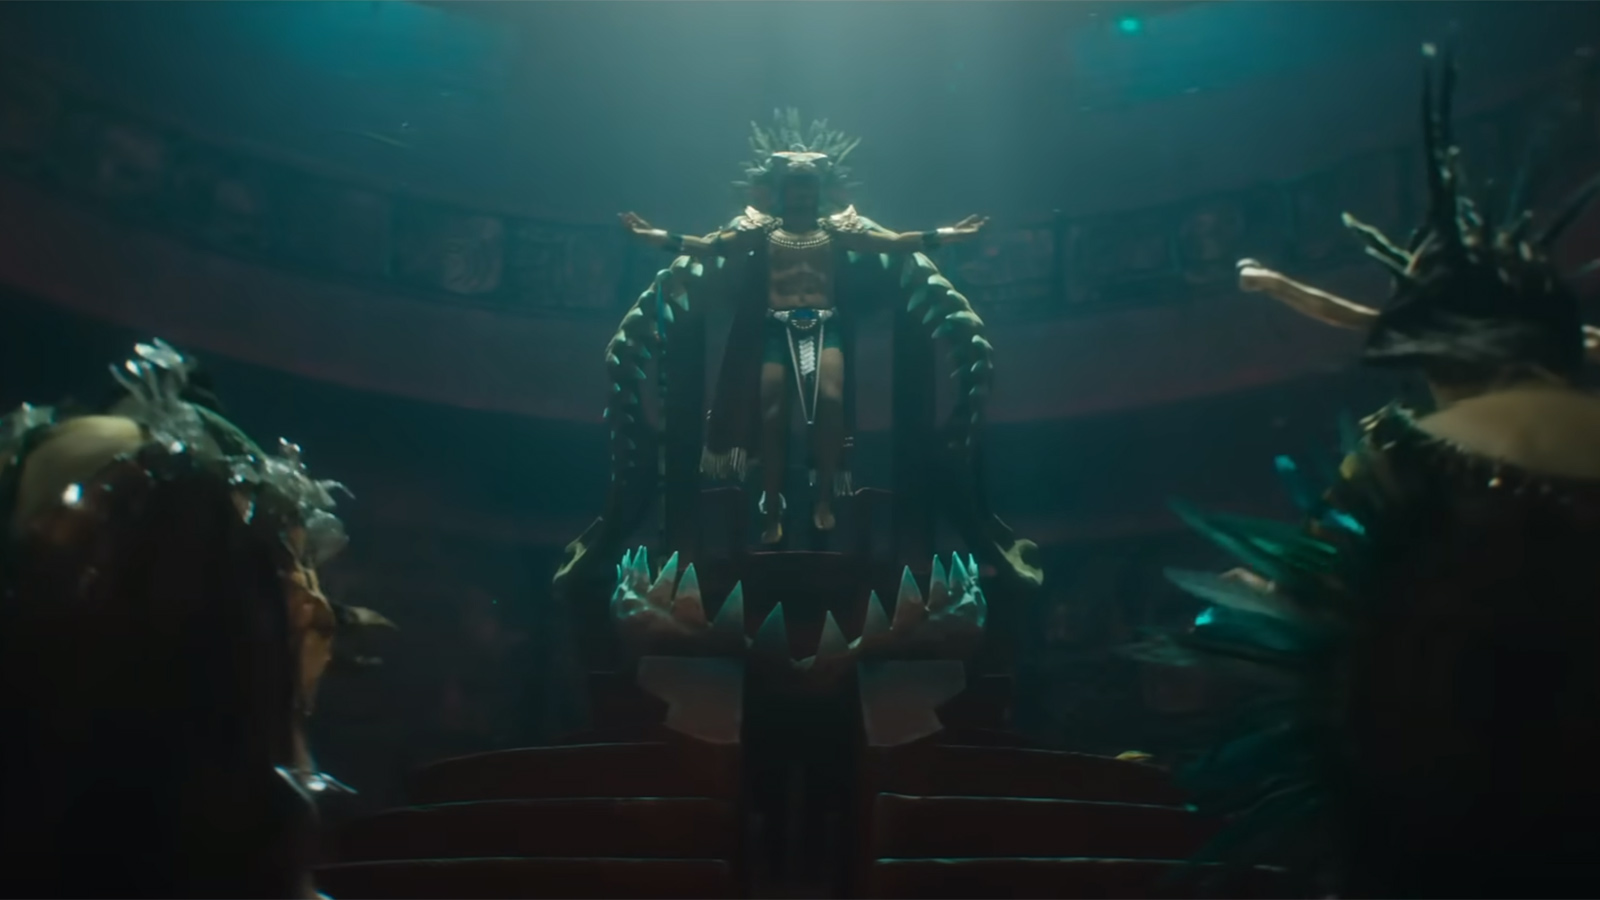 A man named Namor wearing a ceremonial-looking outfit stands on top of a throne.